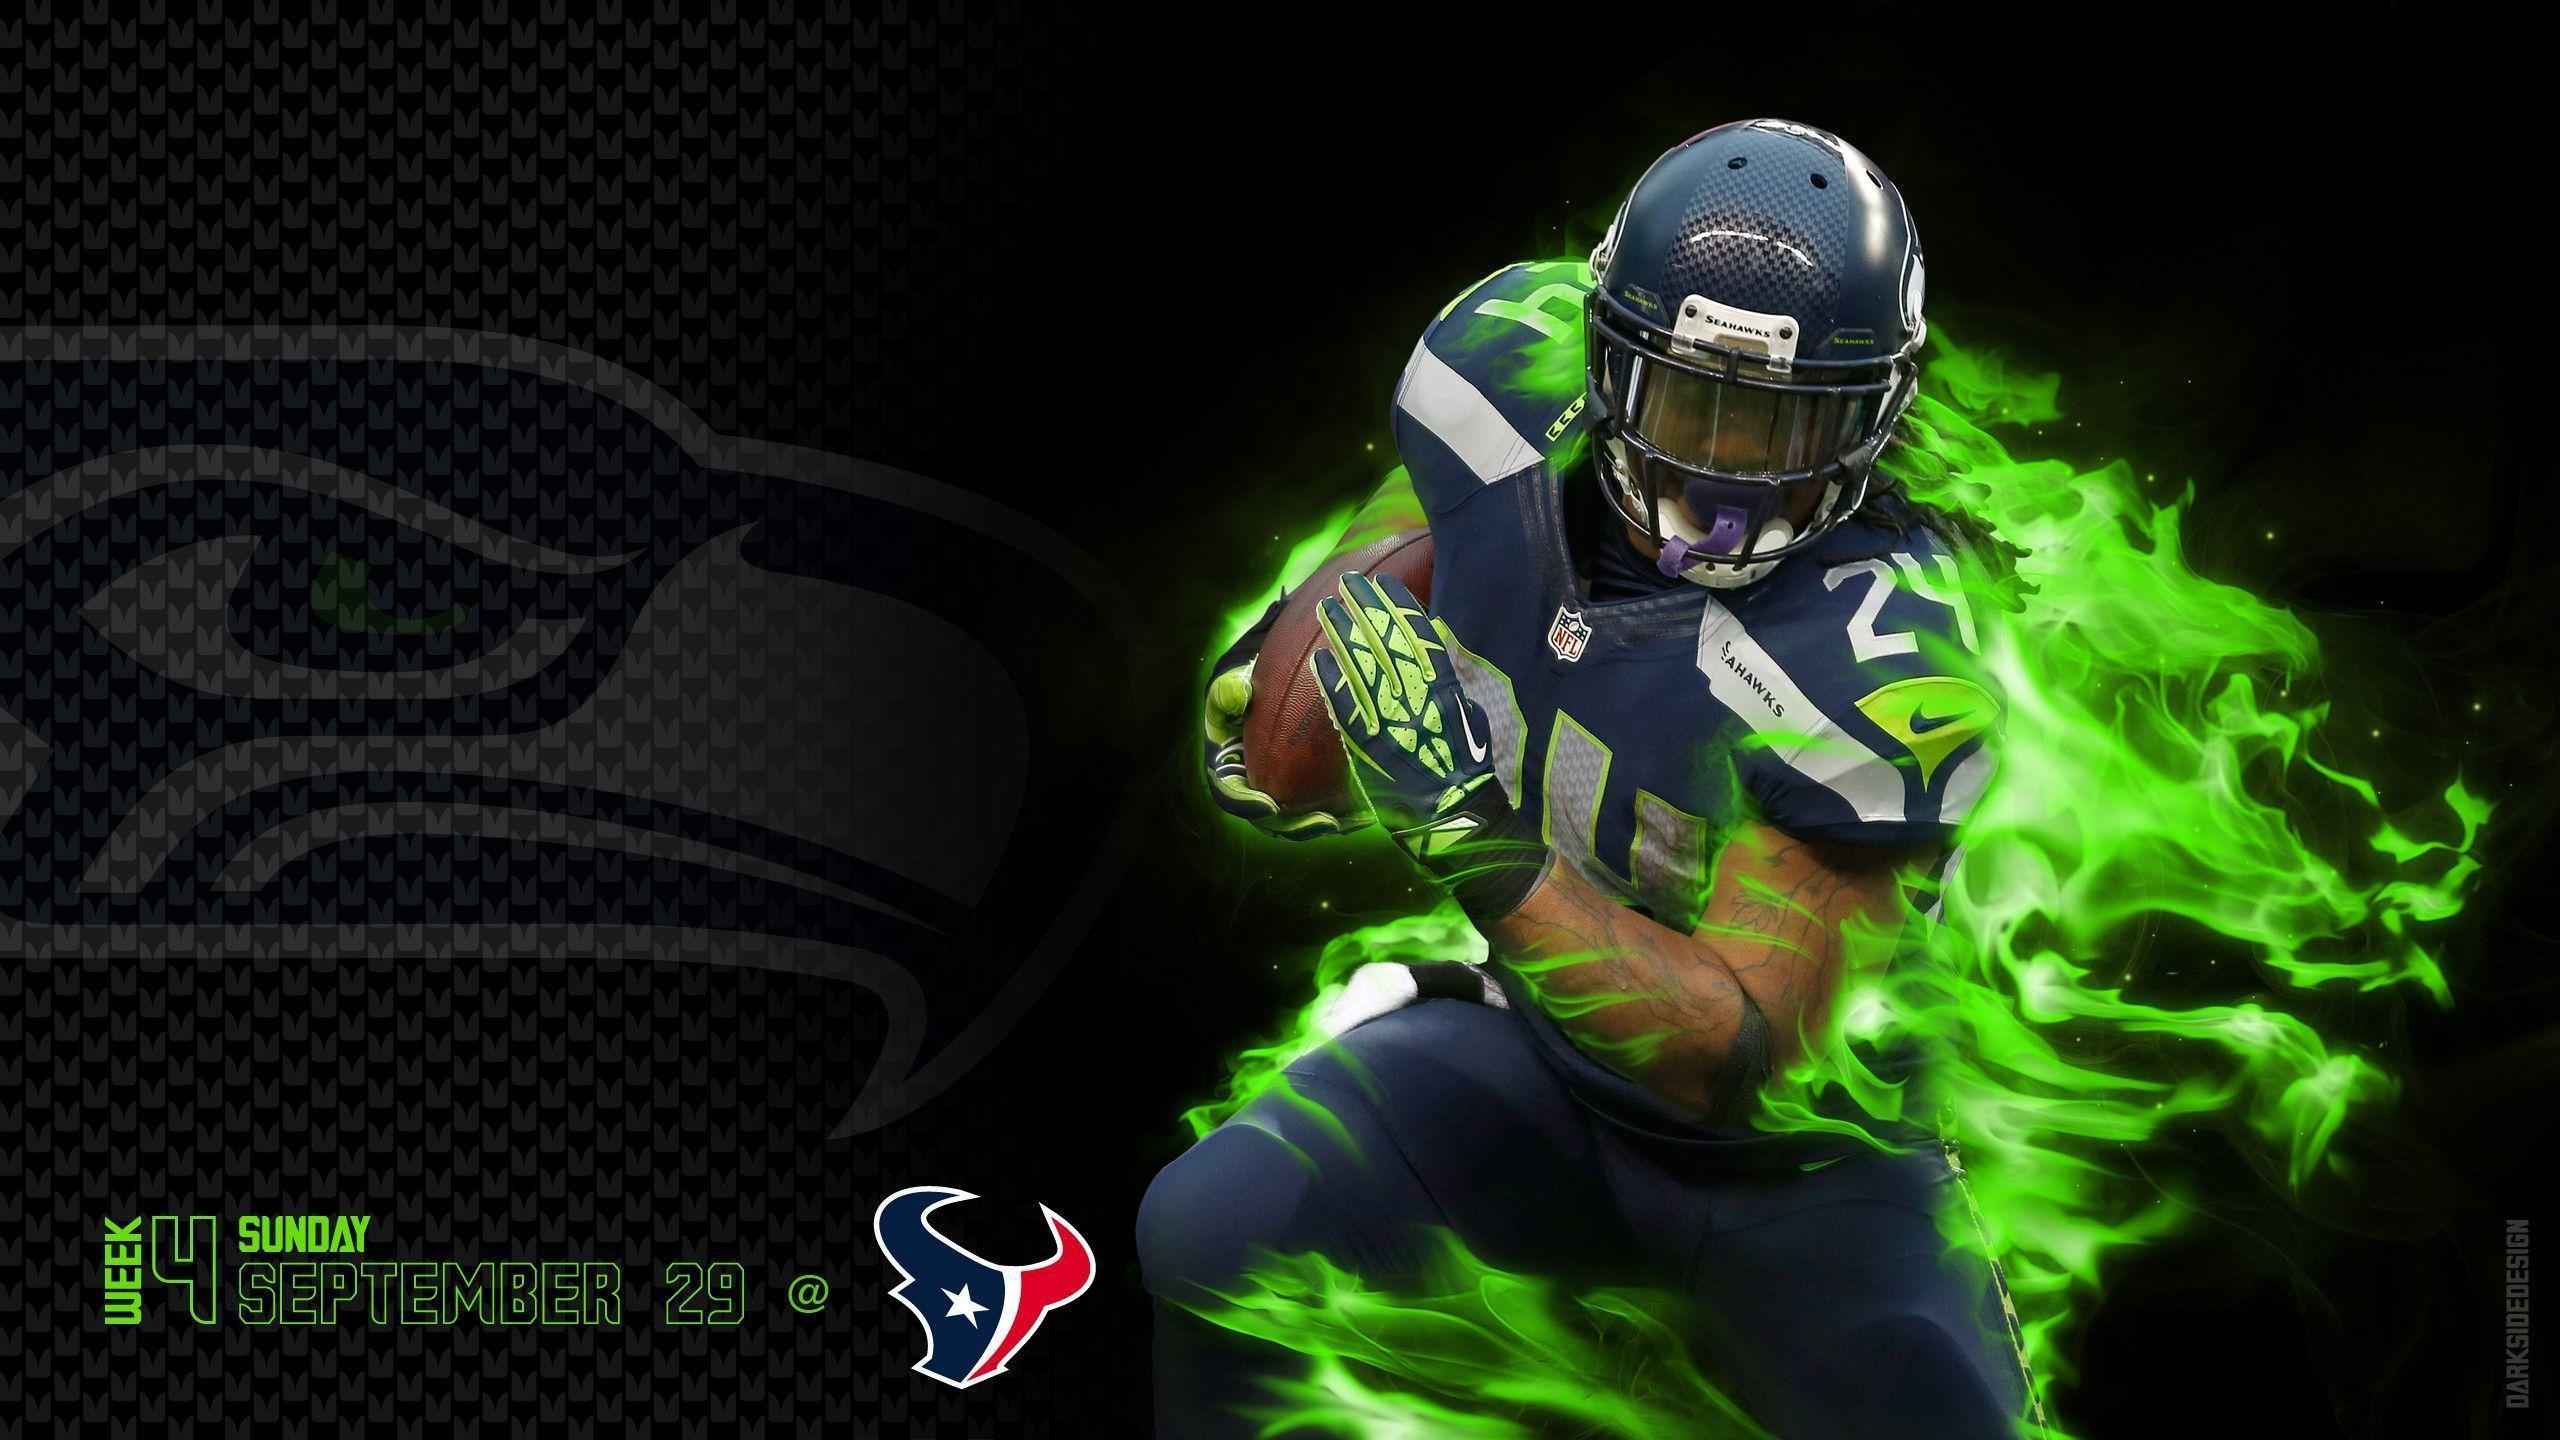 Cool NFL Football Wallpapers